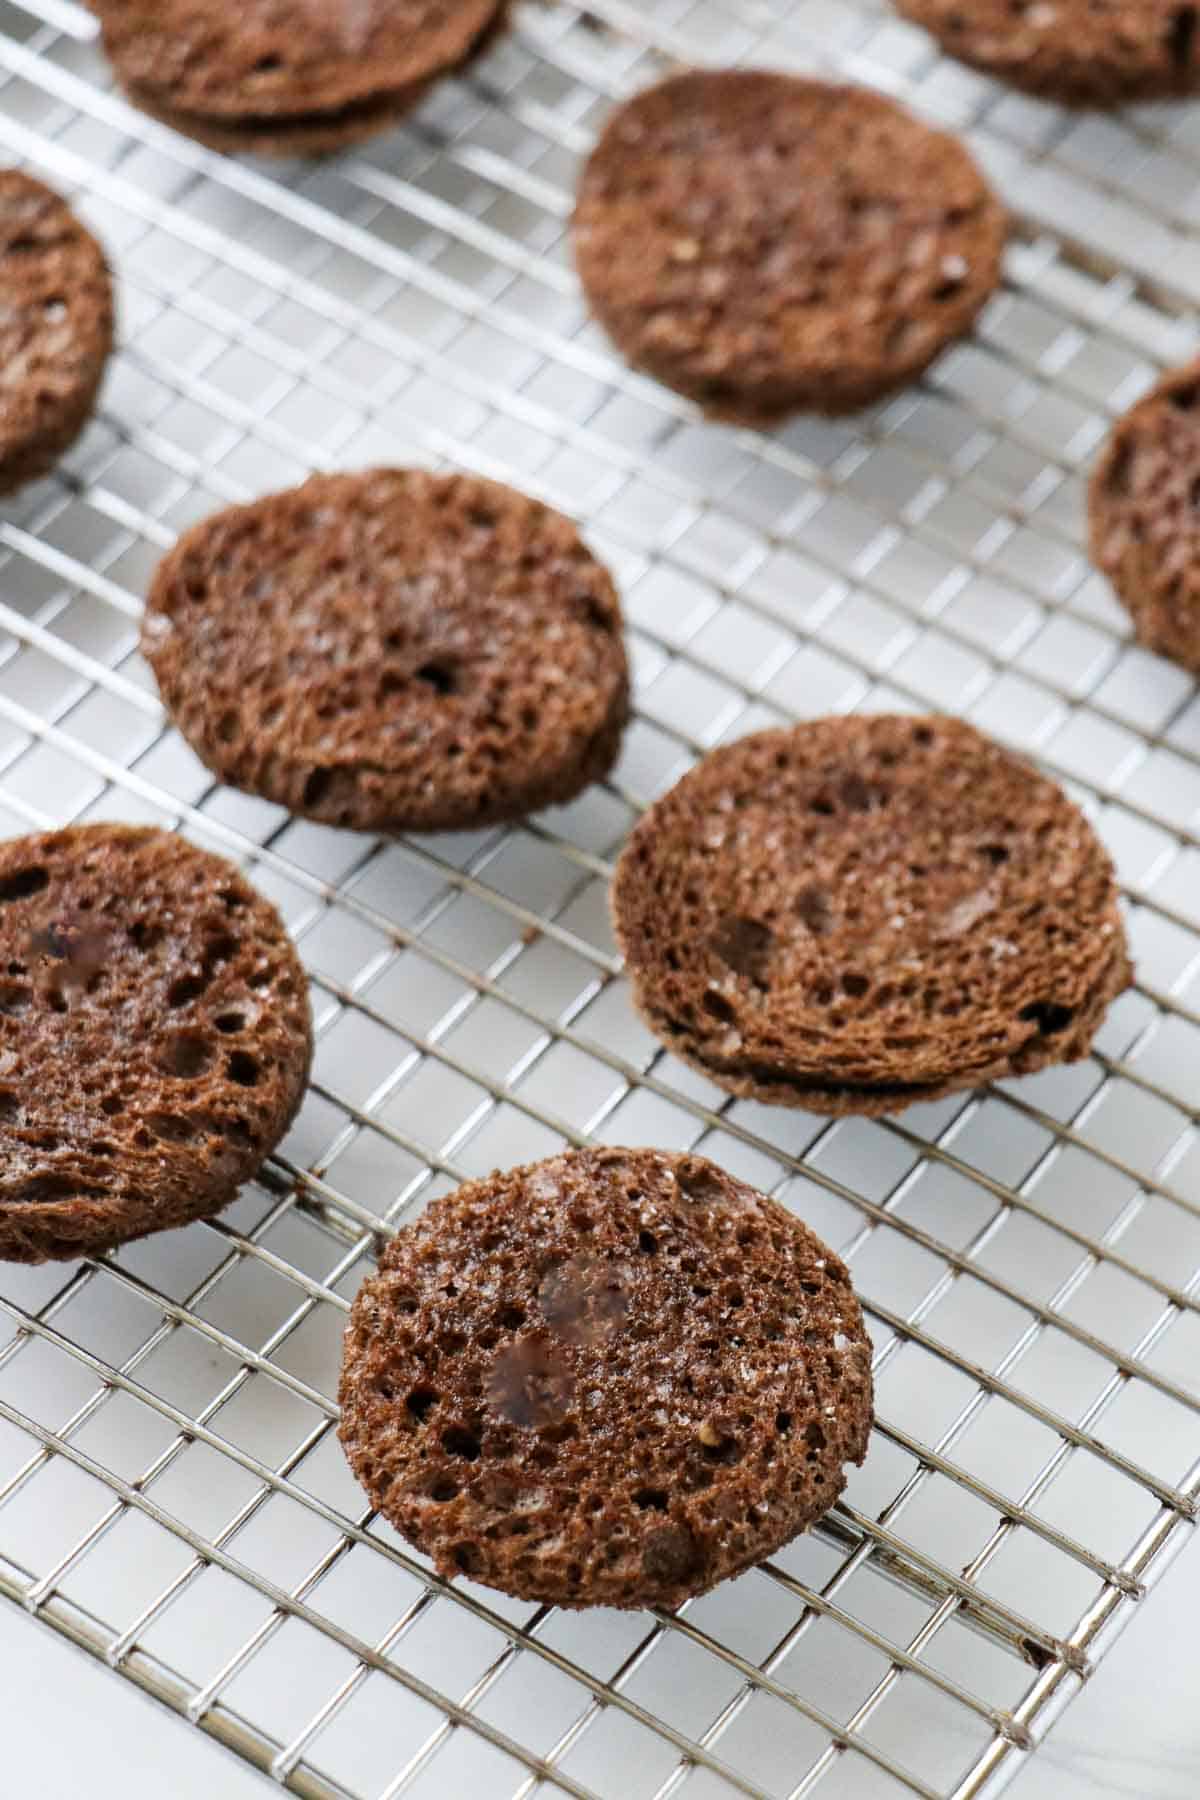 Toasted rye bread rounds on a metal cooling rack.